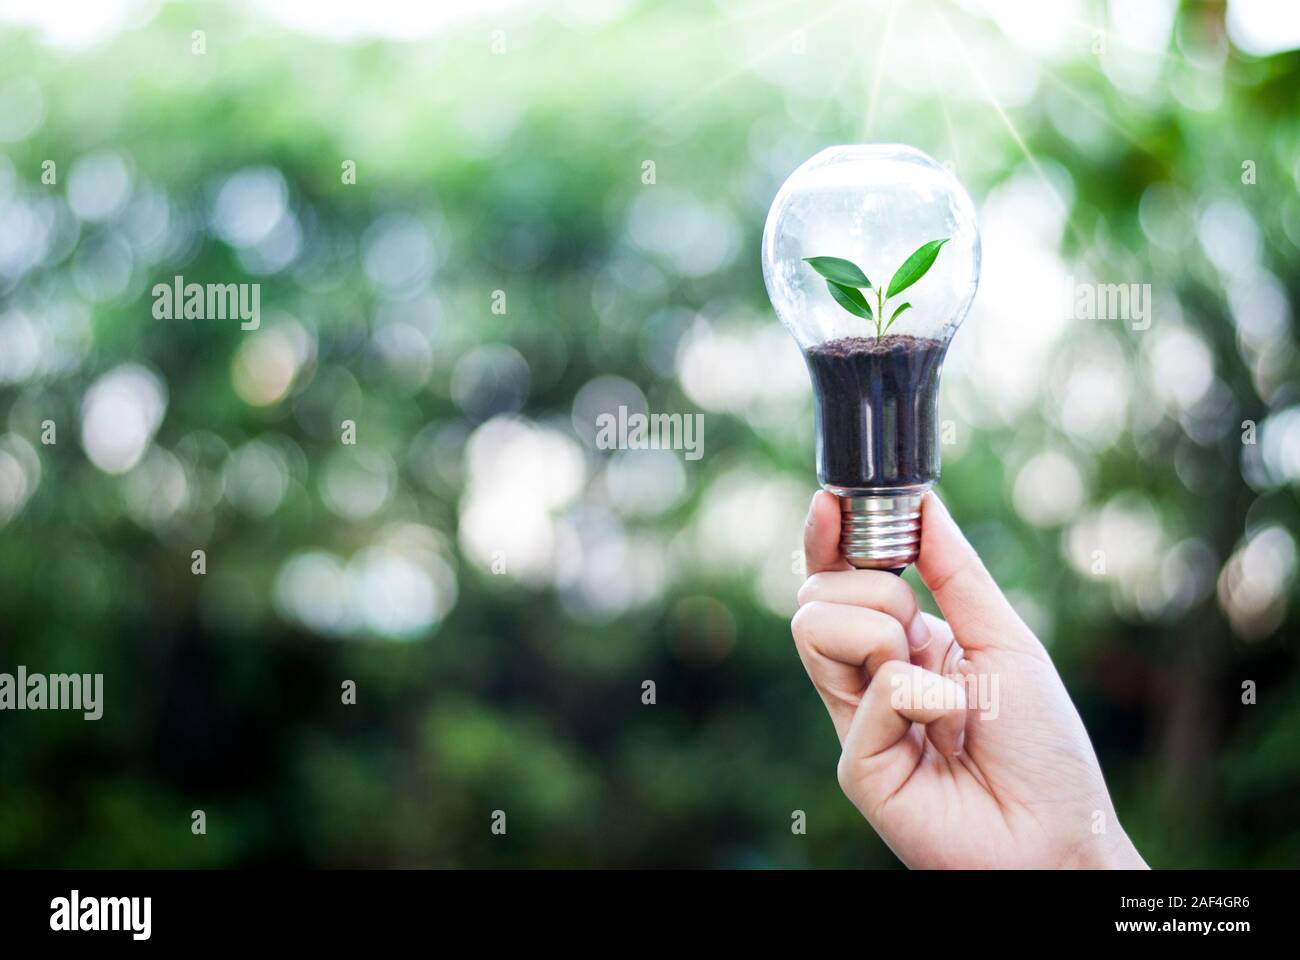 Environmental protection Creativity on Earth Day or the concept of saving energy and the environment. Stock Photo